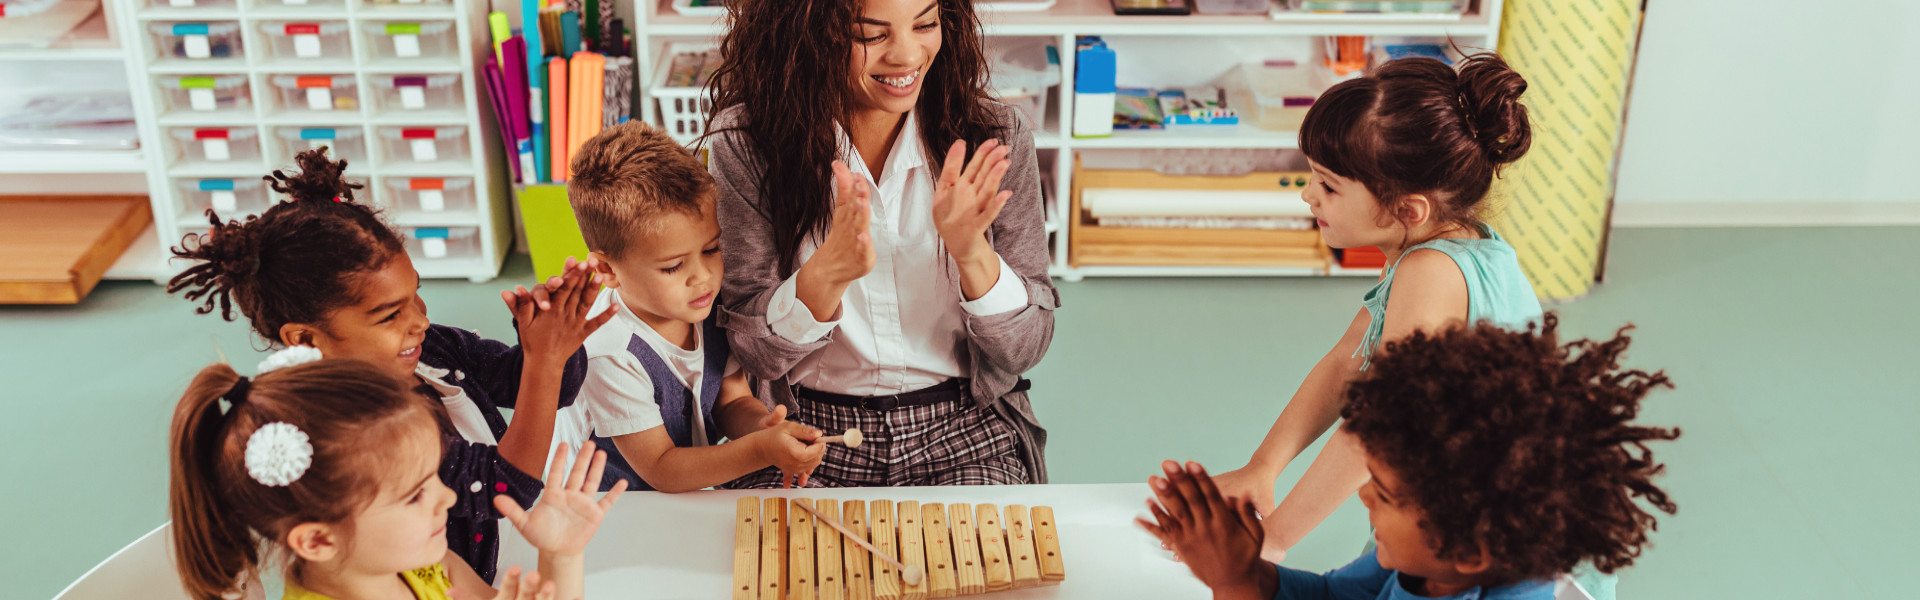 Teacher and diverse preschool boys and girls playing musical toys